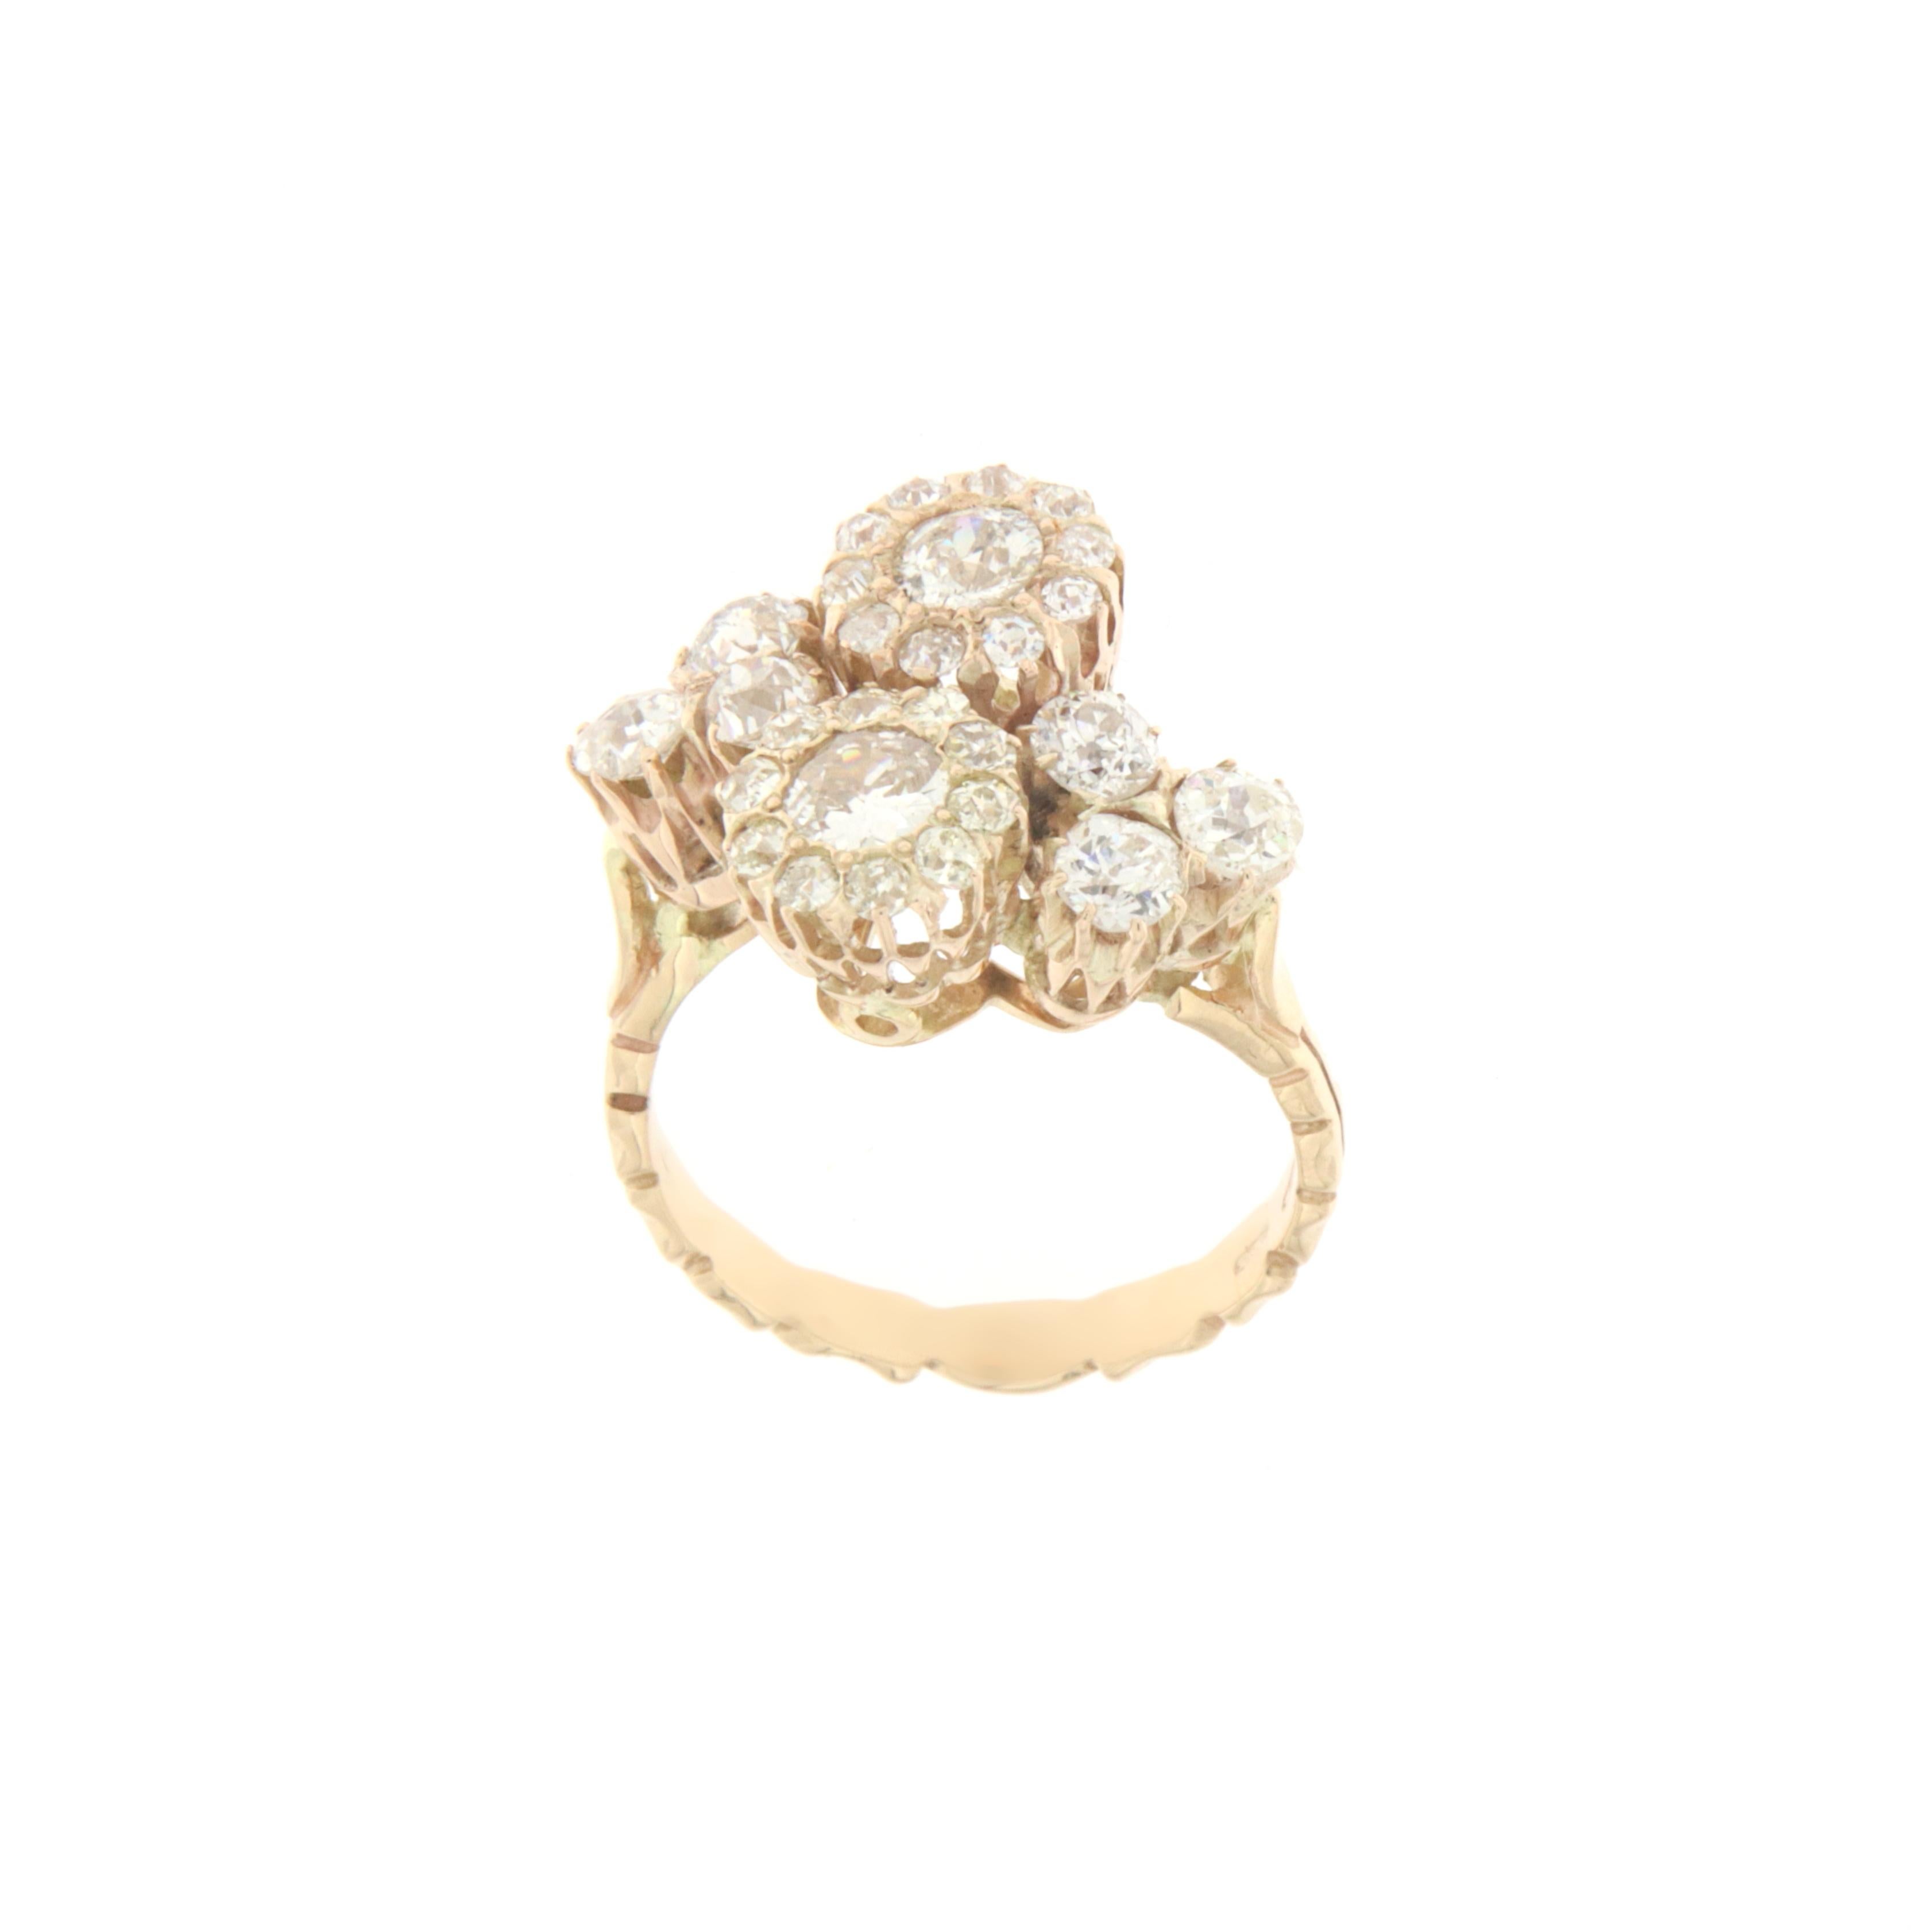 14 karat yellow gold cocktail ring. Handmade by our artisans composed with diamonds
the ring recalls the vintage and period style.
A splendid jewel that can be displayed at any time of the day, a jewel that a woman cannot miss.

Ring Total Weight